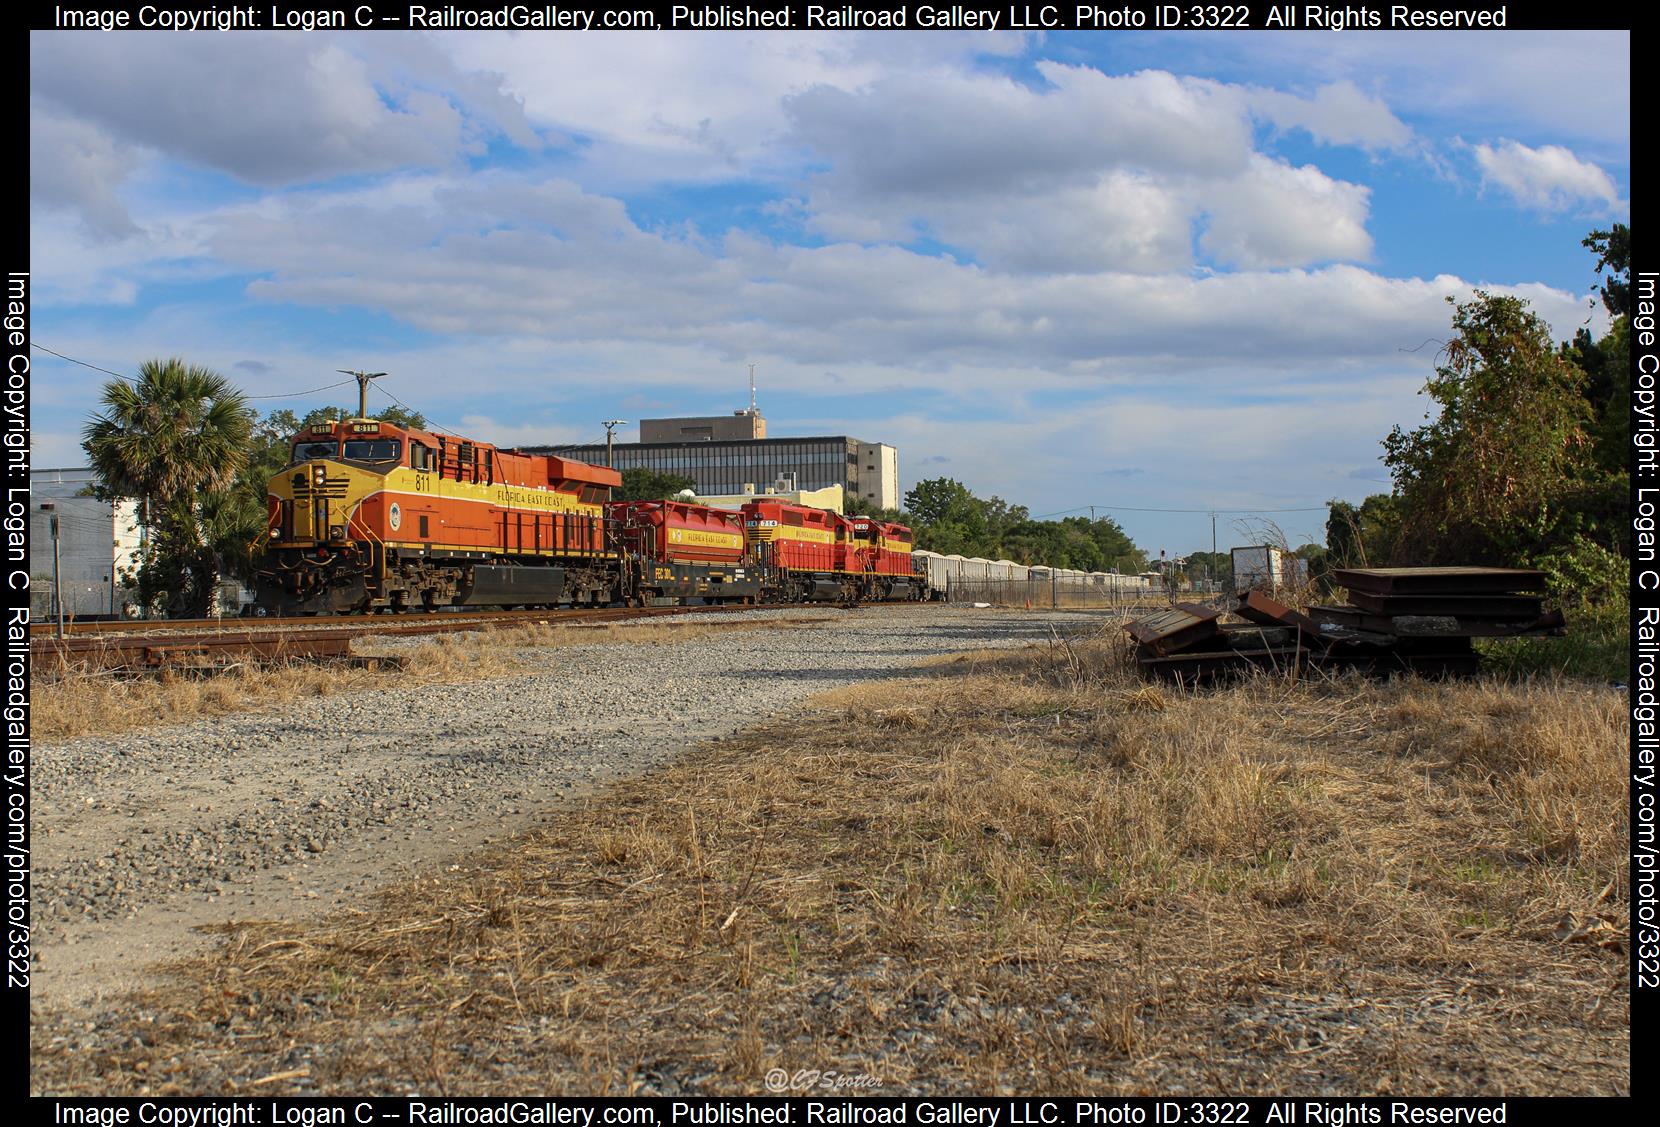 FEC 811 FEC 714 FEC 720 is a class ES44C4 SD40-2 and  is pictured in Titusville, Florida, USA.  This was taken along the FEC Mainline on the Florida East Coast Railway. Photo Copyright: Logan C uploaded to Railroad Gallery on 04/24/2024. This photograph of FEC 811 FEC 714 FEC 720 was taken on Tuesday, April 23, 2024. All Rights Reserved. 